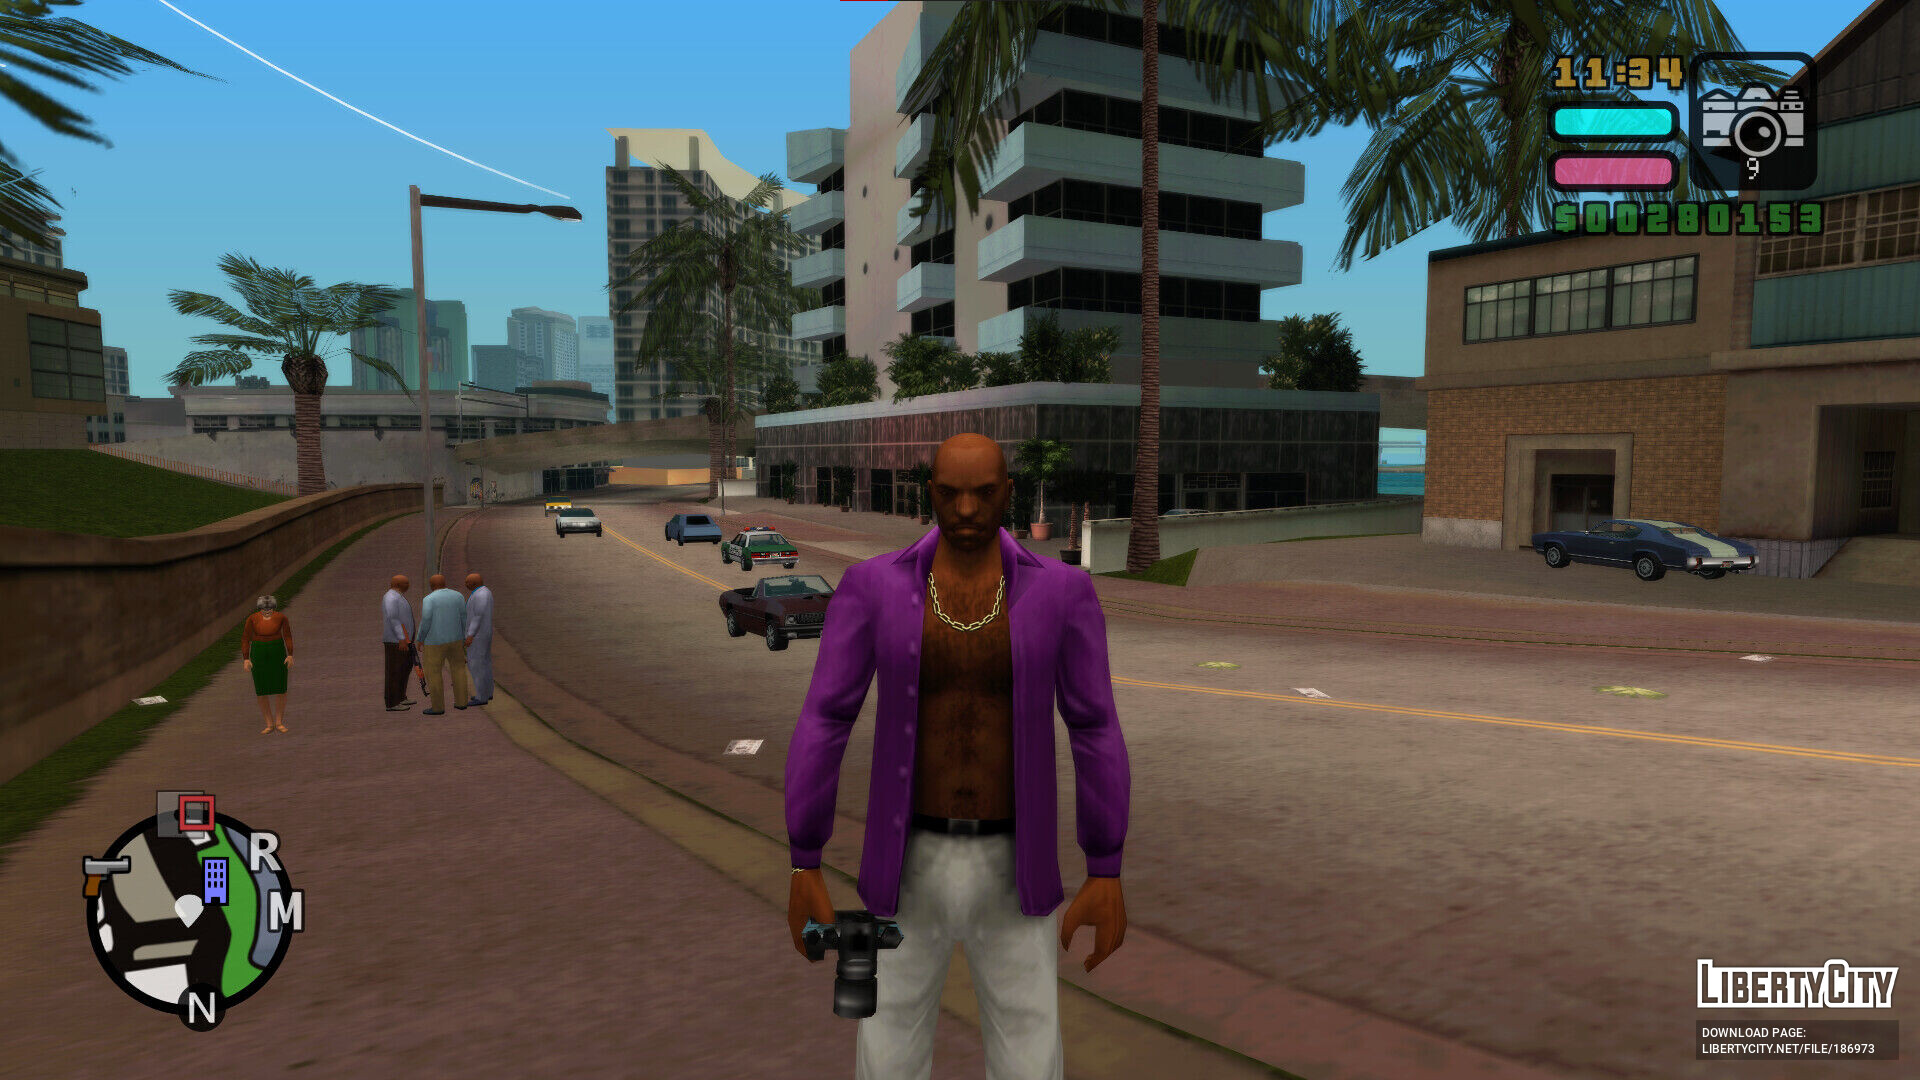 Grand Theft Auto: Liberty City Stories PS2 Gameplay HD (PCSX2) 